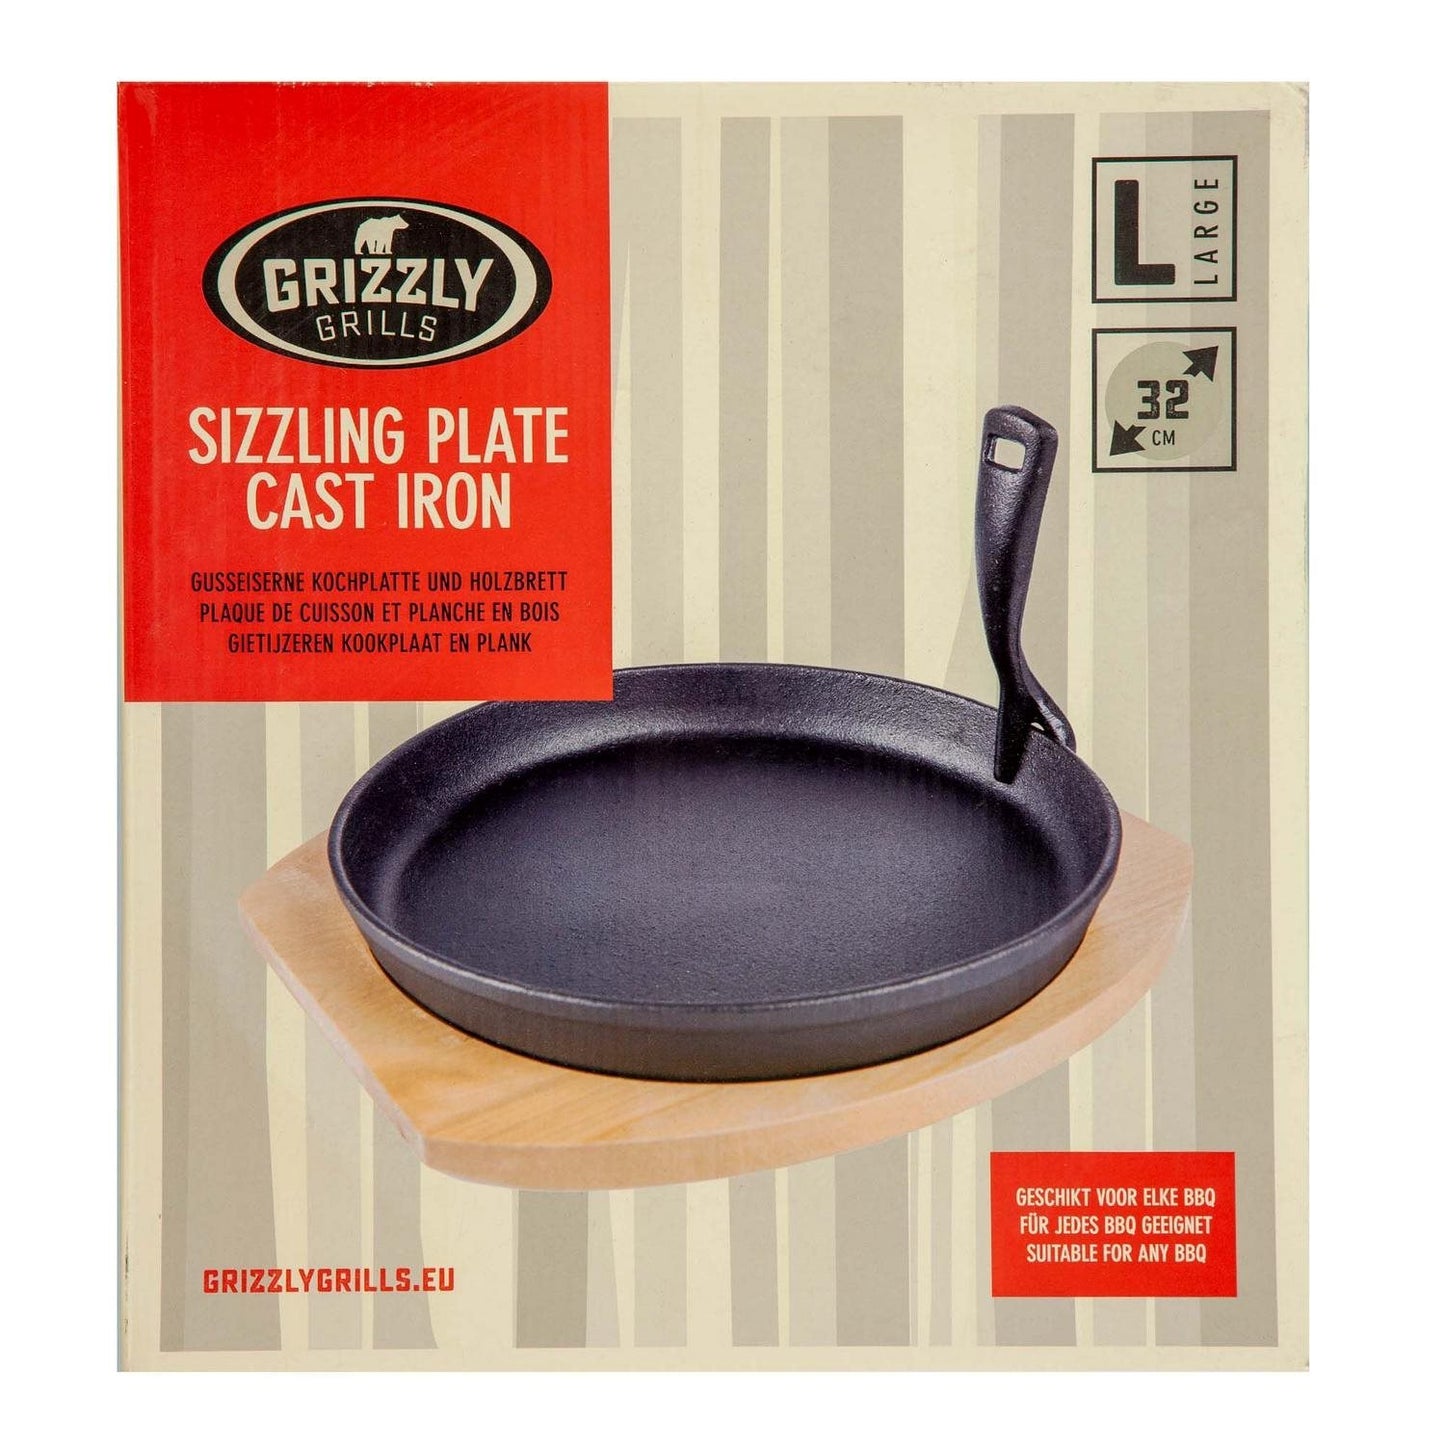 Grizzly Grills Sizzling Plate Cast Iron L